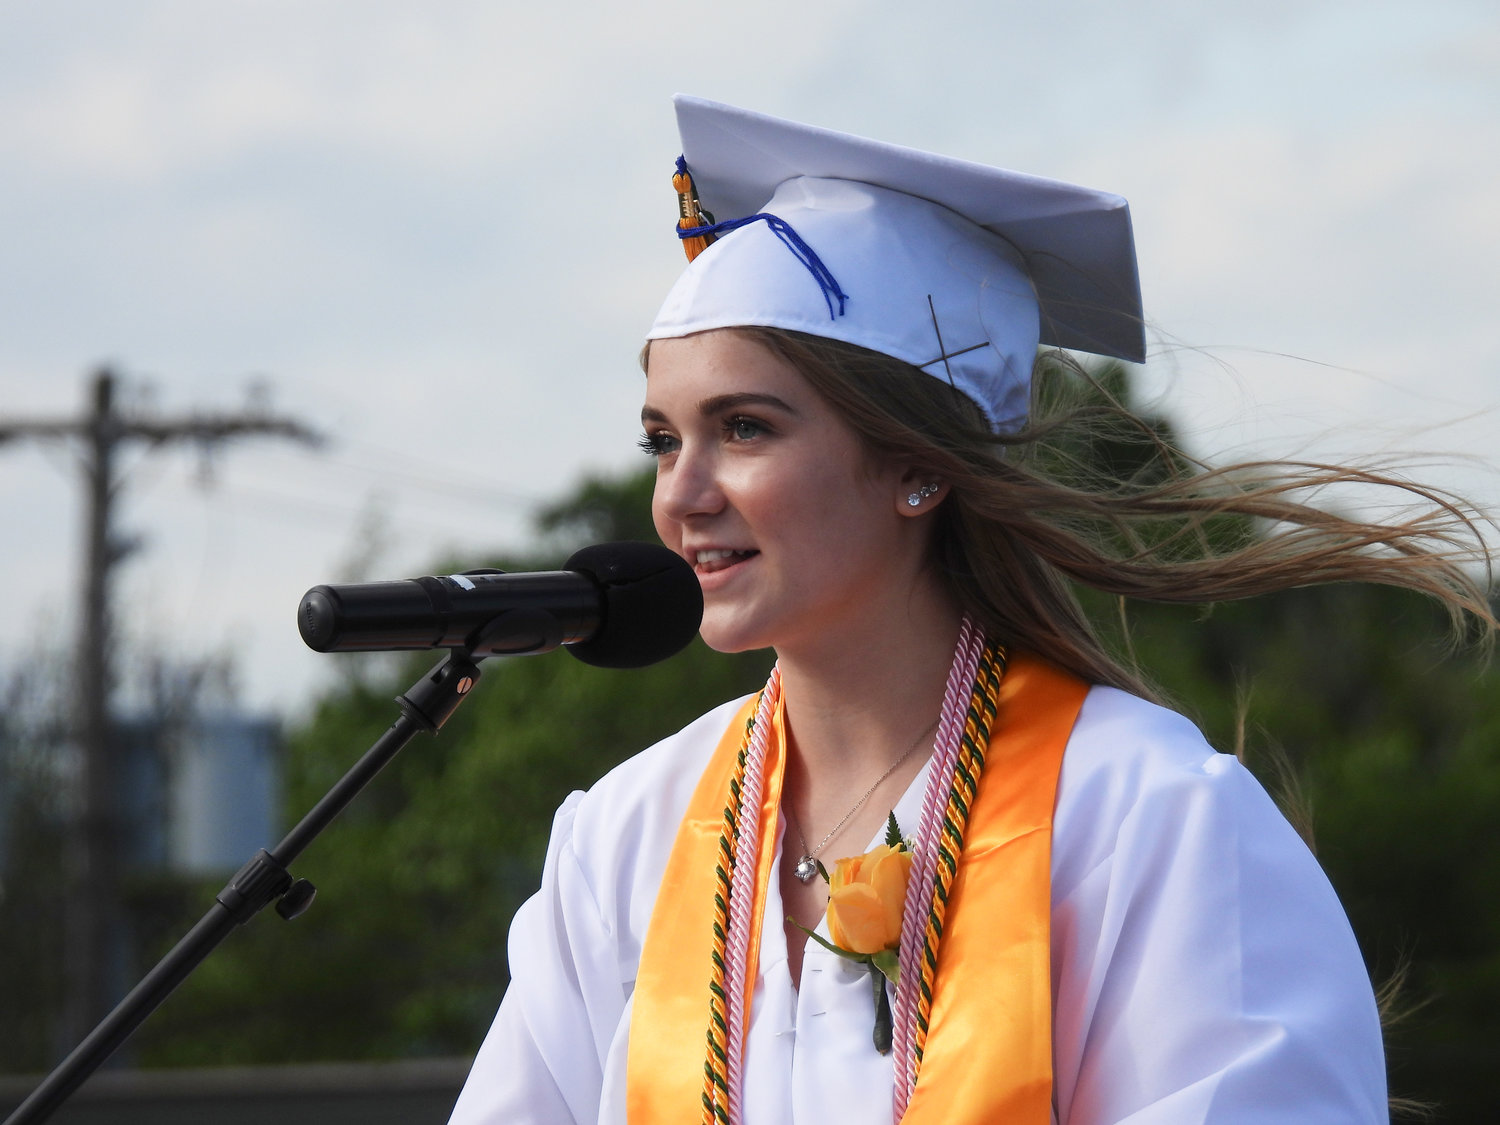 Westmoreland High School graduating seniors participated in the school's 119th annual commencement, starting the latest chapter of their lives on Friday, June 17. Class President Lauren Stephens speaks at the Class of 2022 graduation.